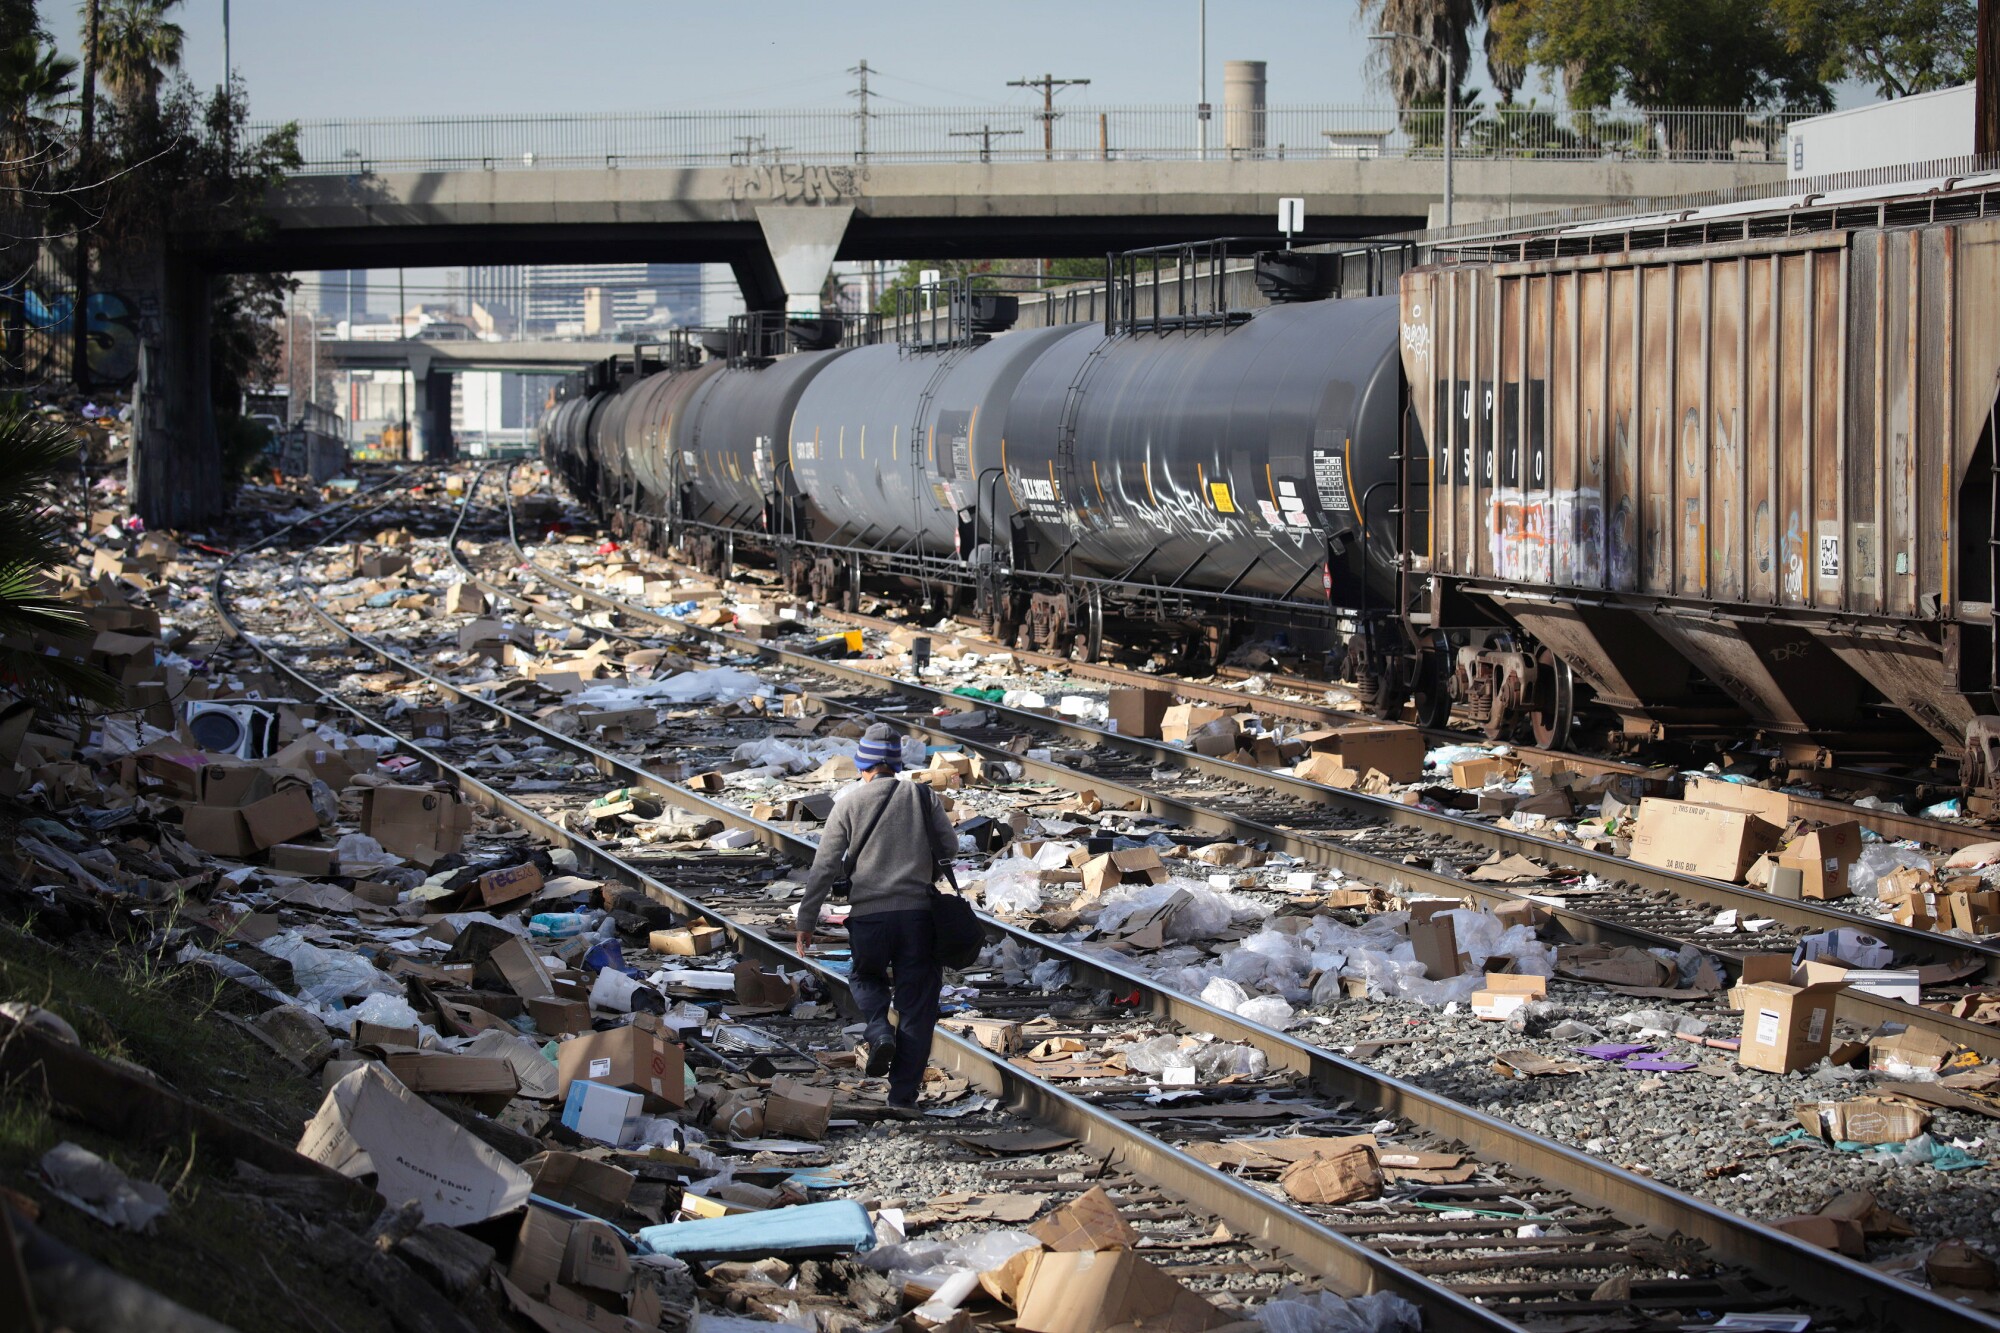 A man walks along a section of the Union Pacific train tracks in downtown Los Angeles